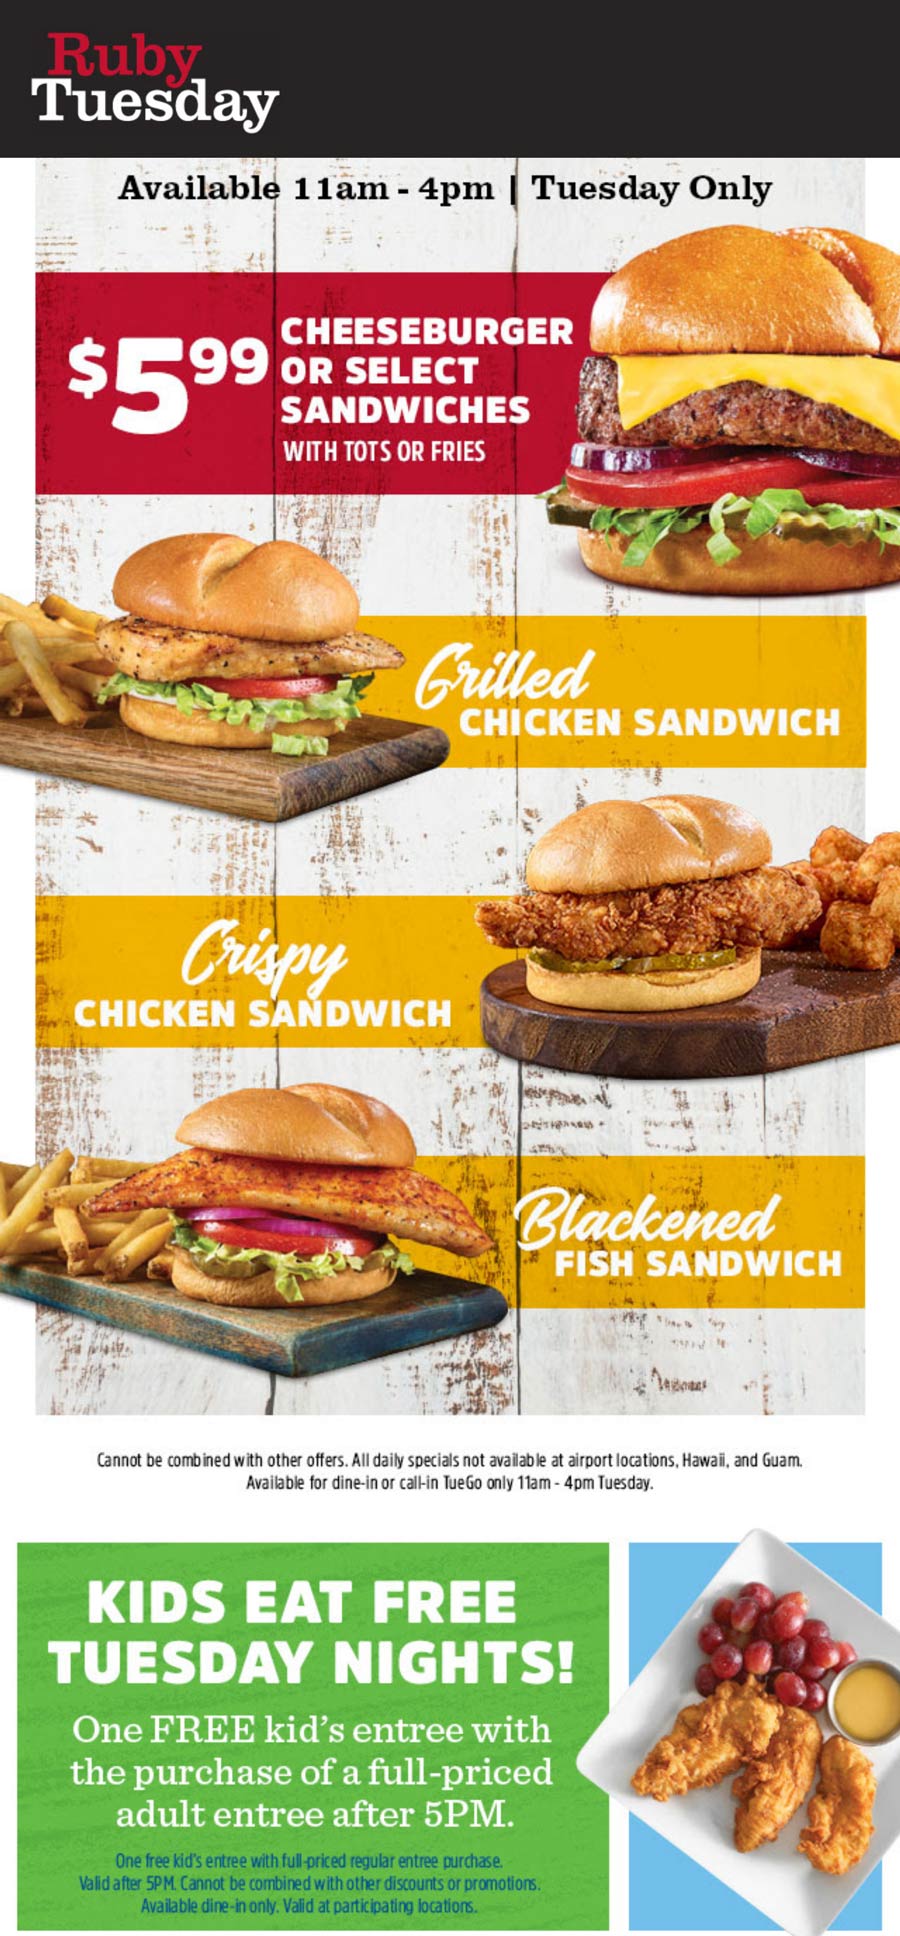 Ruby Tuesday restaurants Coupon  Chicken sandwich or cheeseburger + fries = $6 lunch today at Ruby Tuesday #rubytuesday 